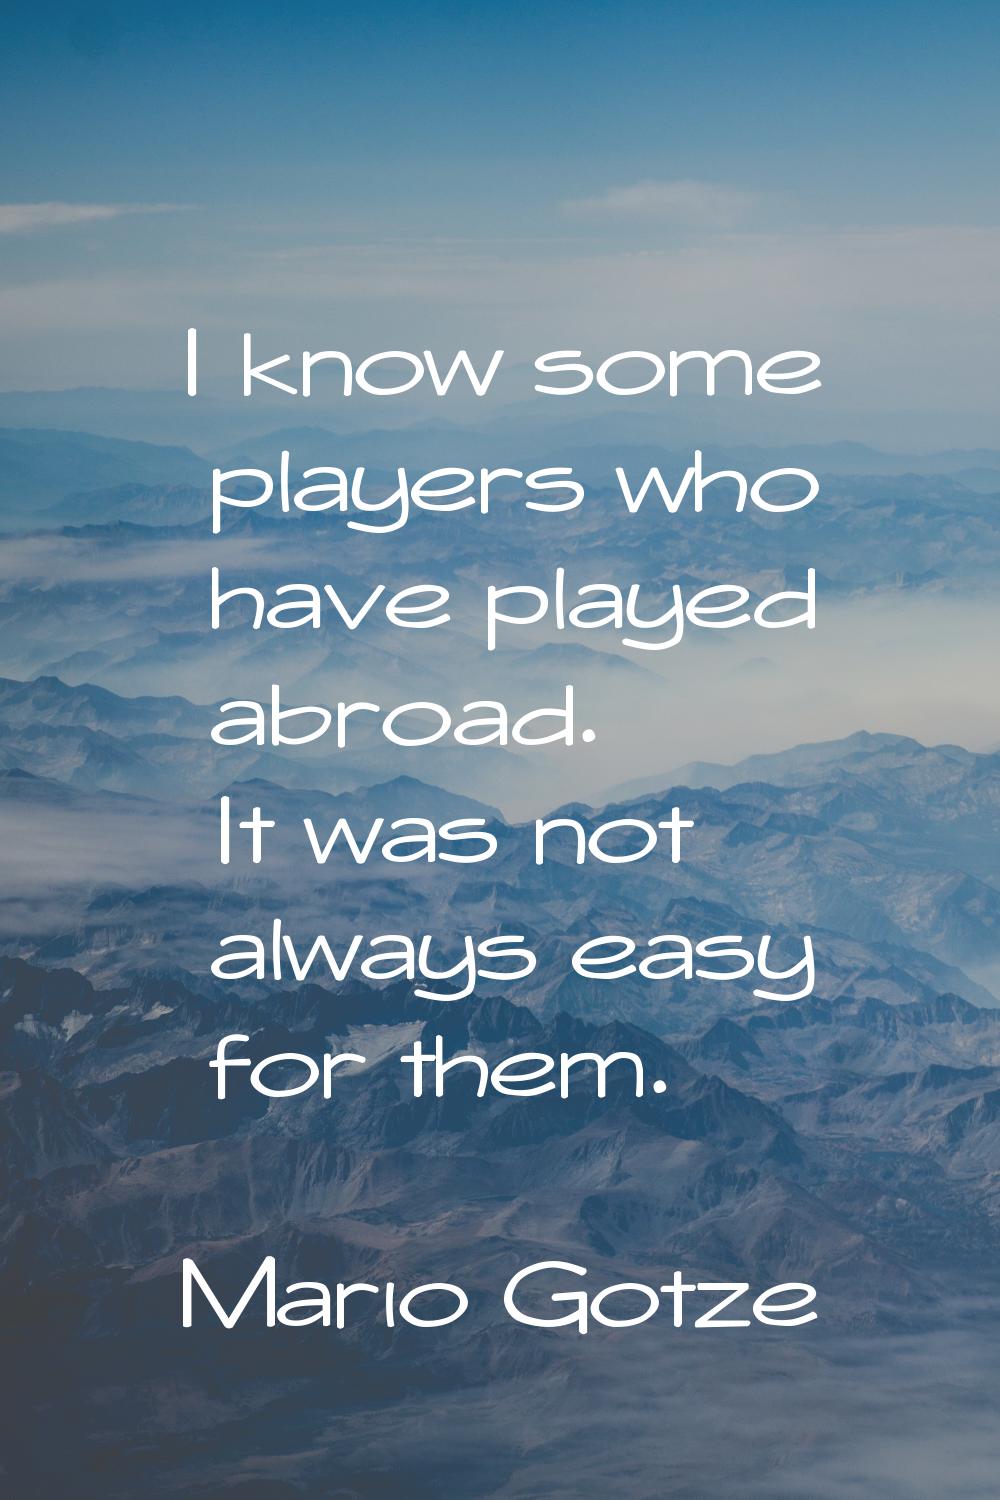 I know some players who have played abroad. It was not always easy for them.